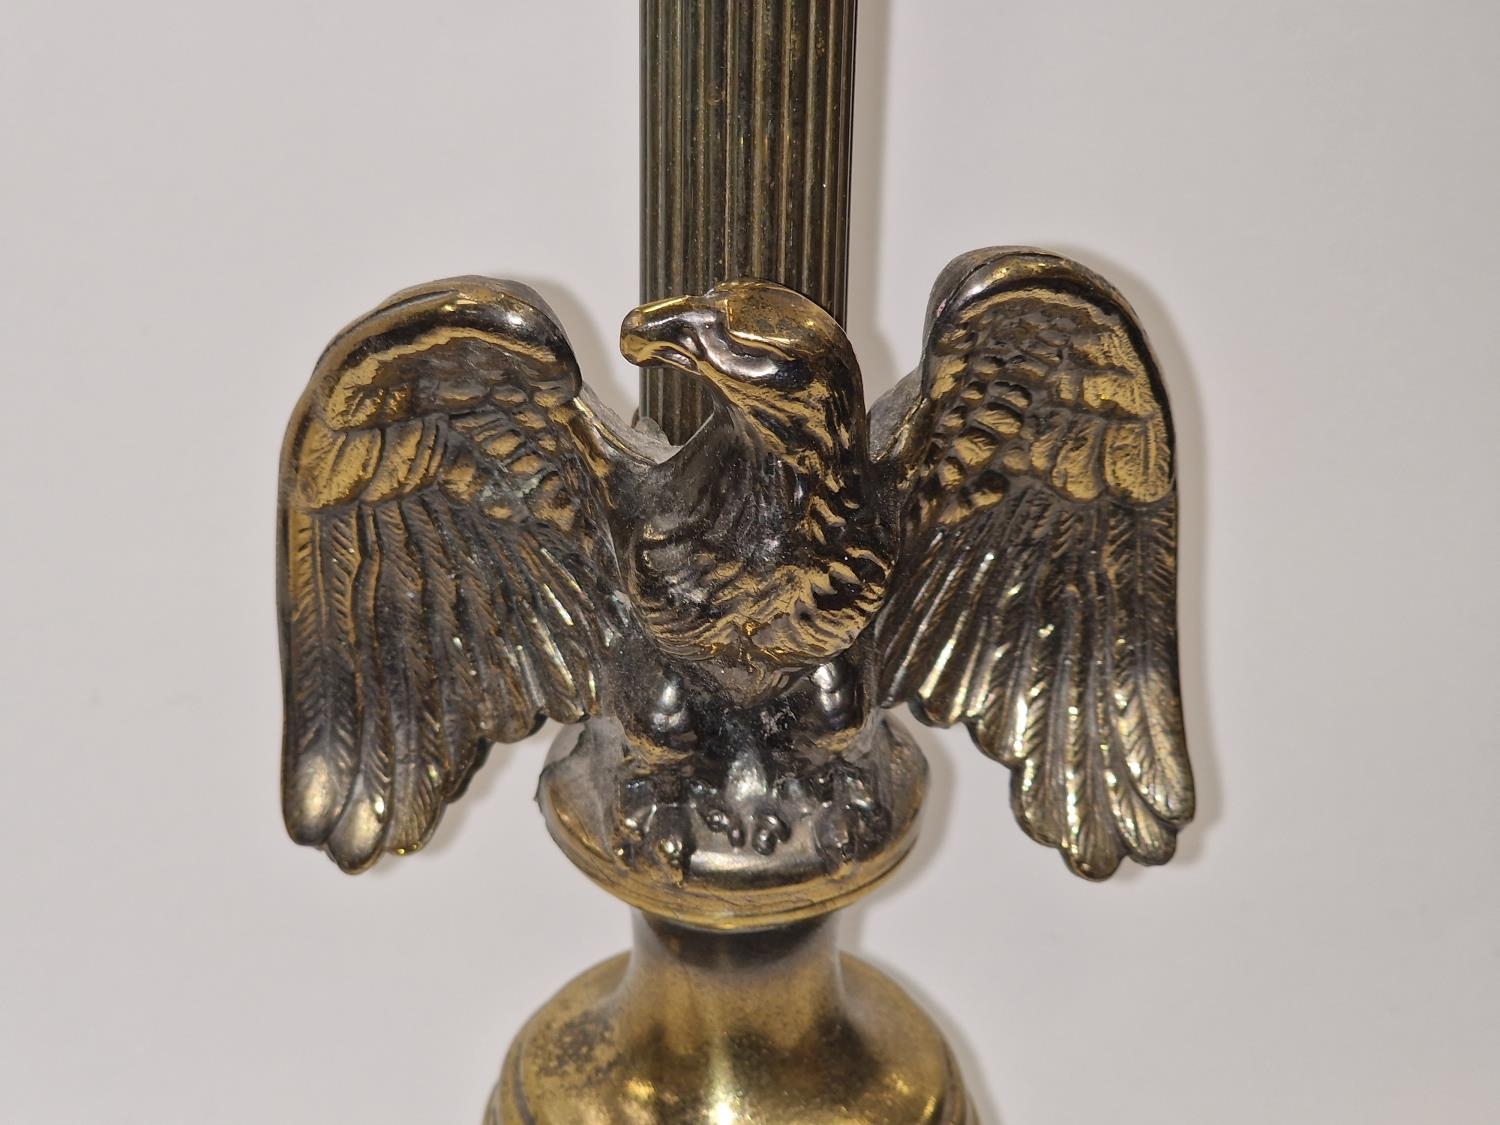 vintage brass column lamp base depicting an eagle 48cm tall. - Image 2 of 3